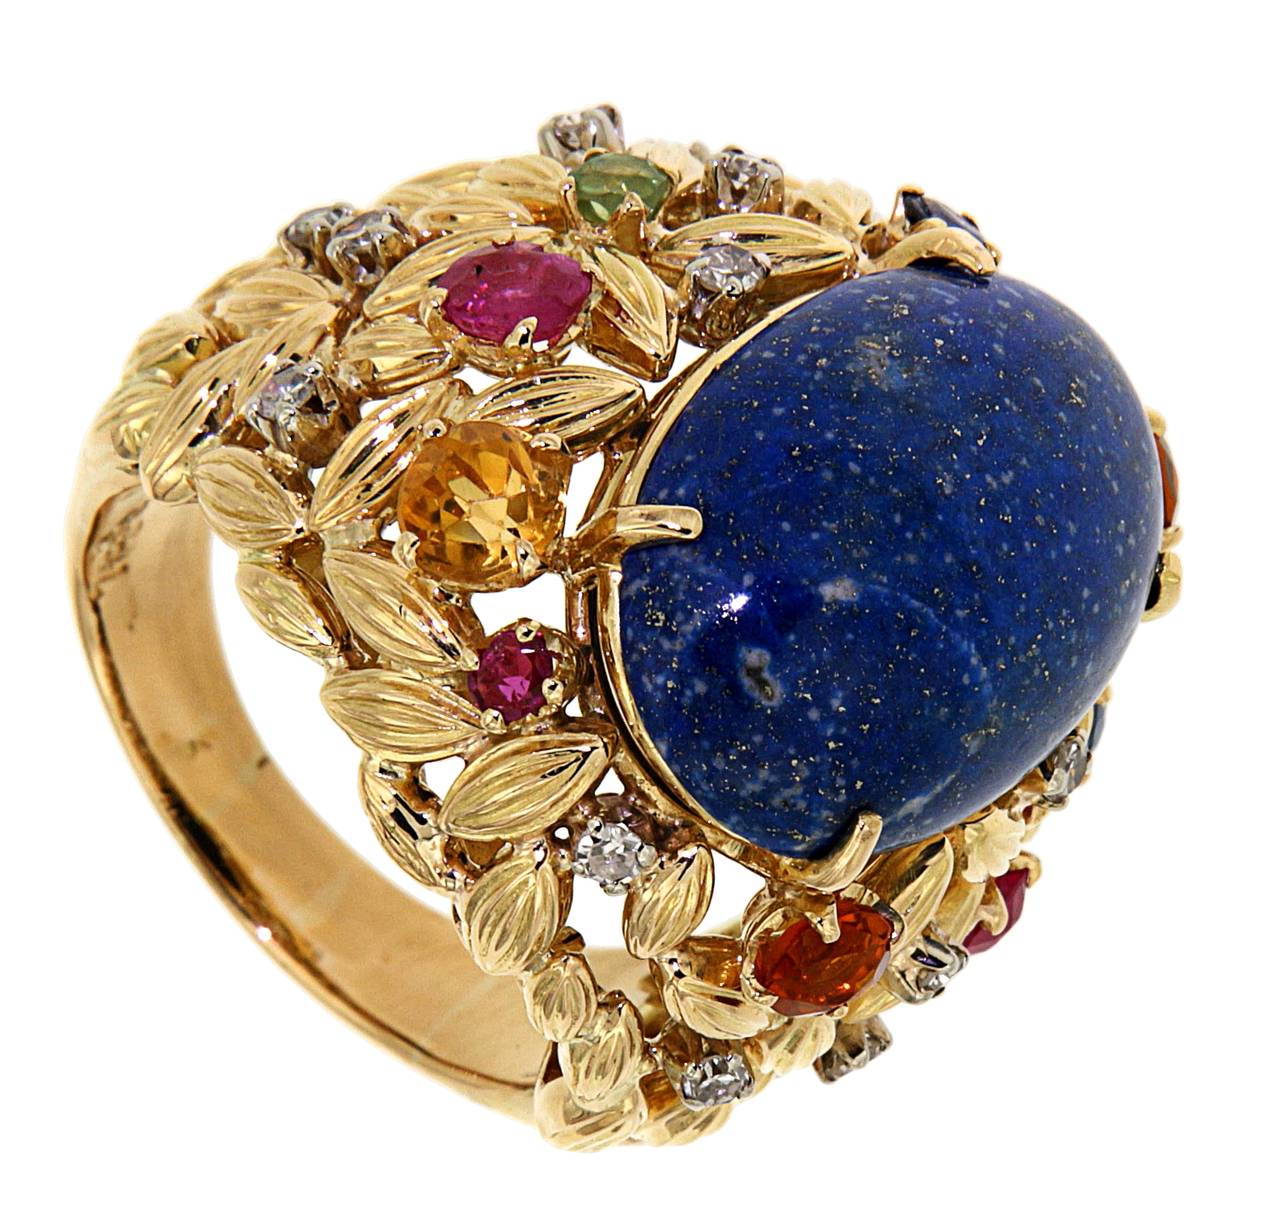 This vintage ring made in 1960s is crafted from 18 carat Yellow Gold Ring and an astonishing 20x13 mm Lapis Lazuli cabochon with 14 Diamonds of circa 0.14 carat, 3 Rubies, 2 Sapphires 3 Citrines.
The finger size is 6 3/4 but can be resized on